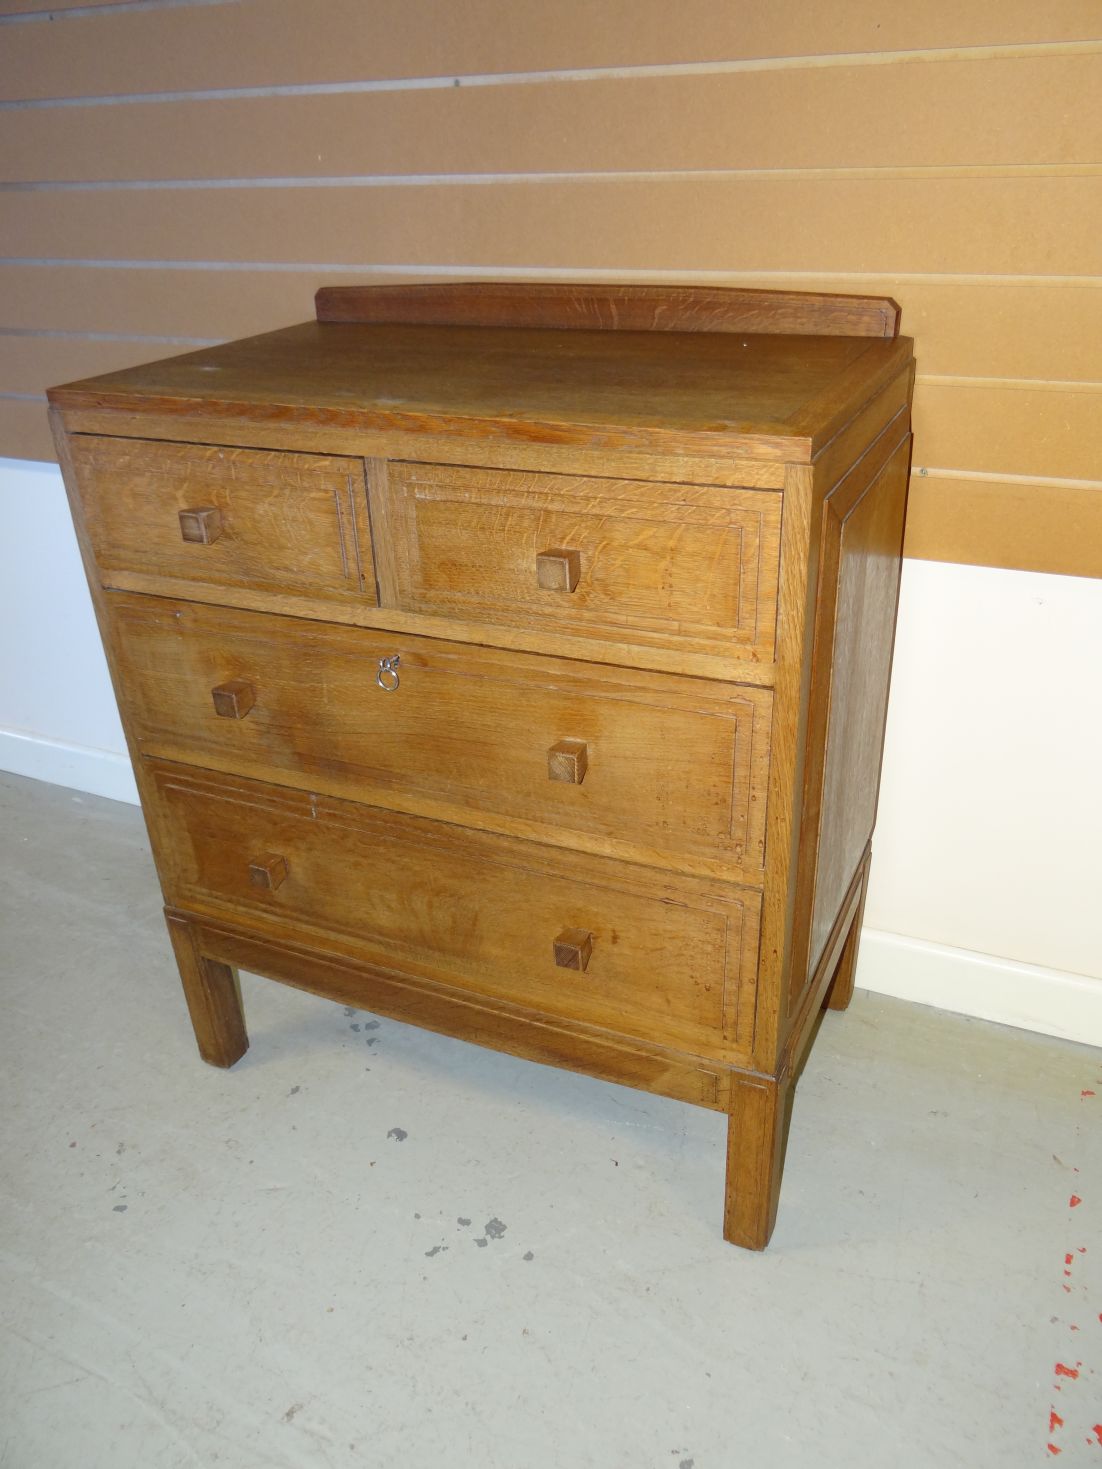 A small light oak Brynmawr Furniture chest of two long and two short drawers bearing Brynmawr label,